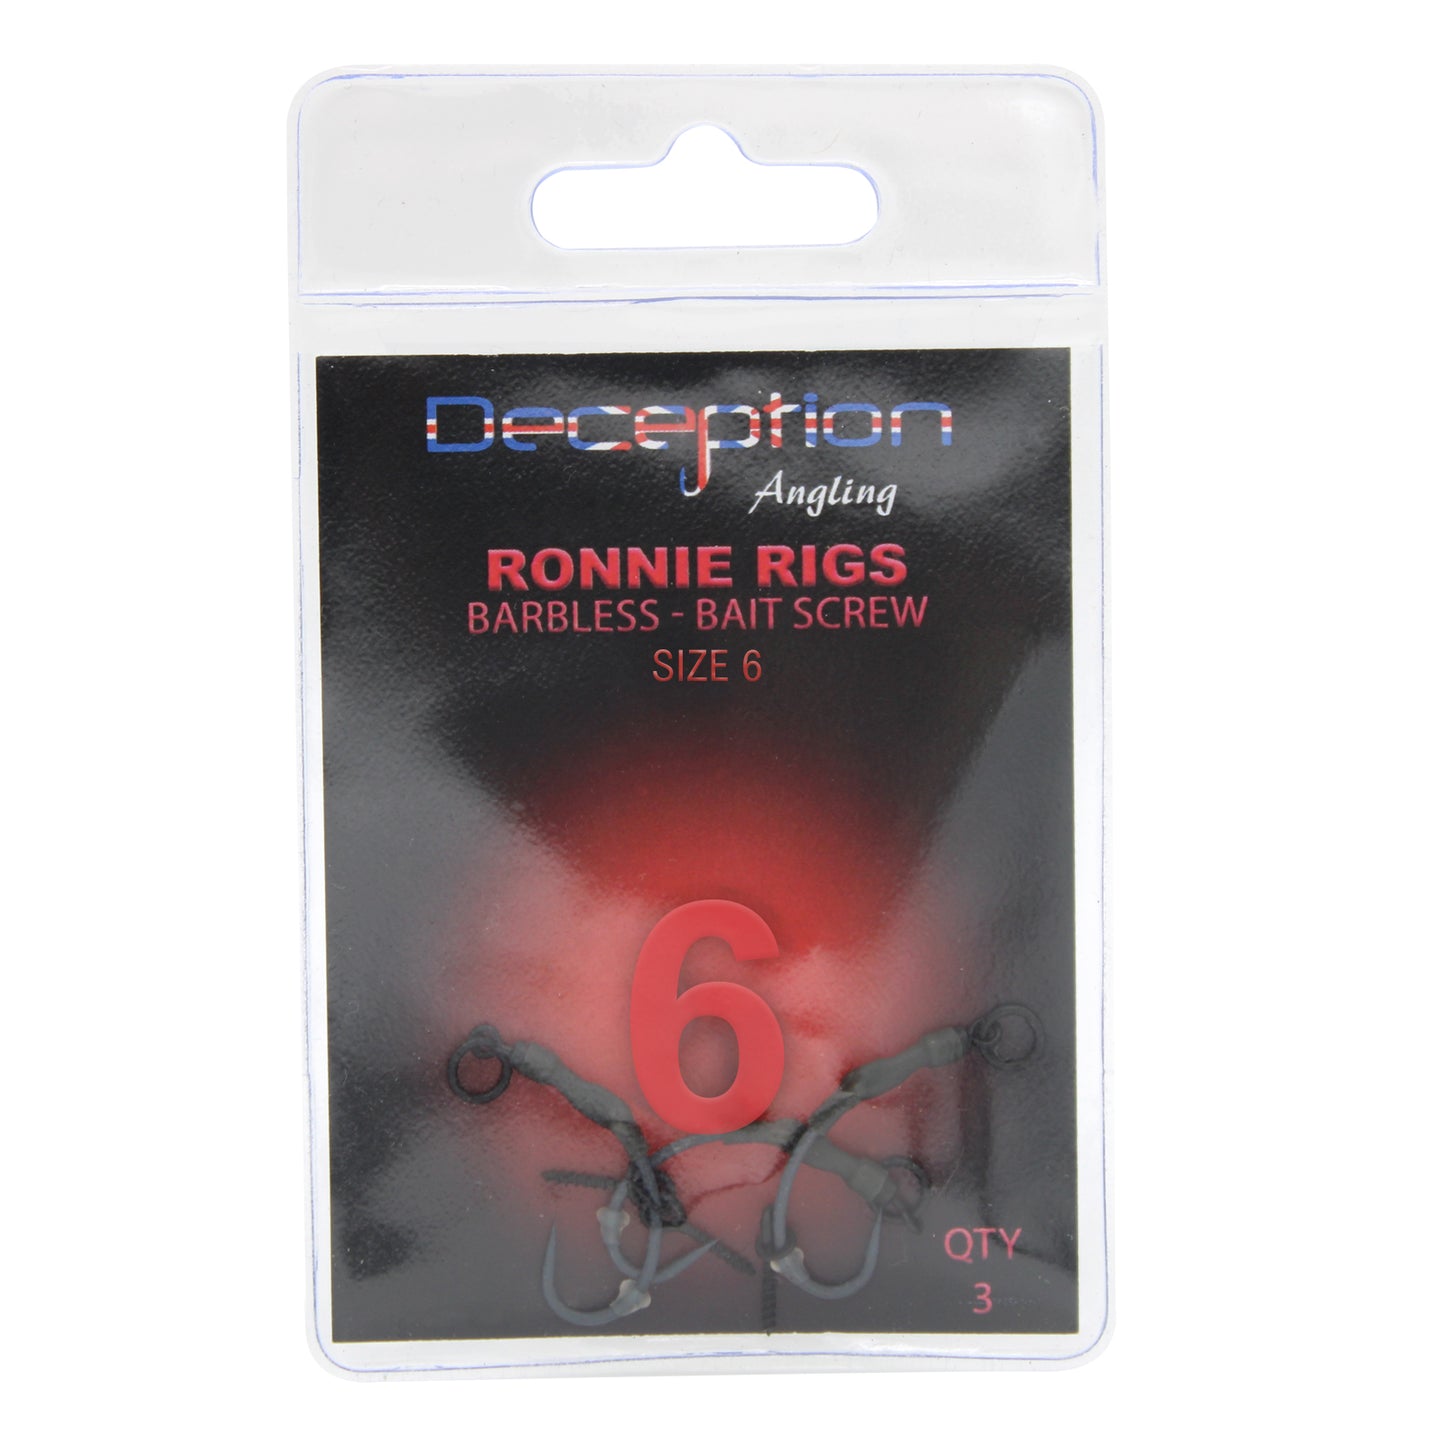 Ronnie Rig Barbless Fishing Hooks with Bait Screw Pack of 3